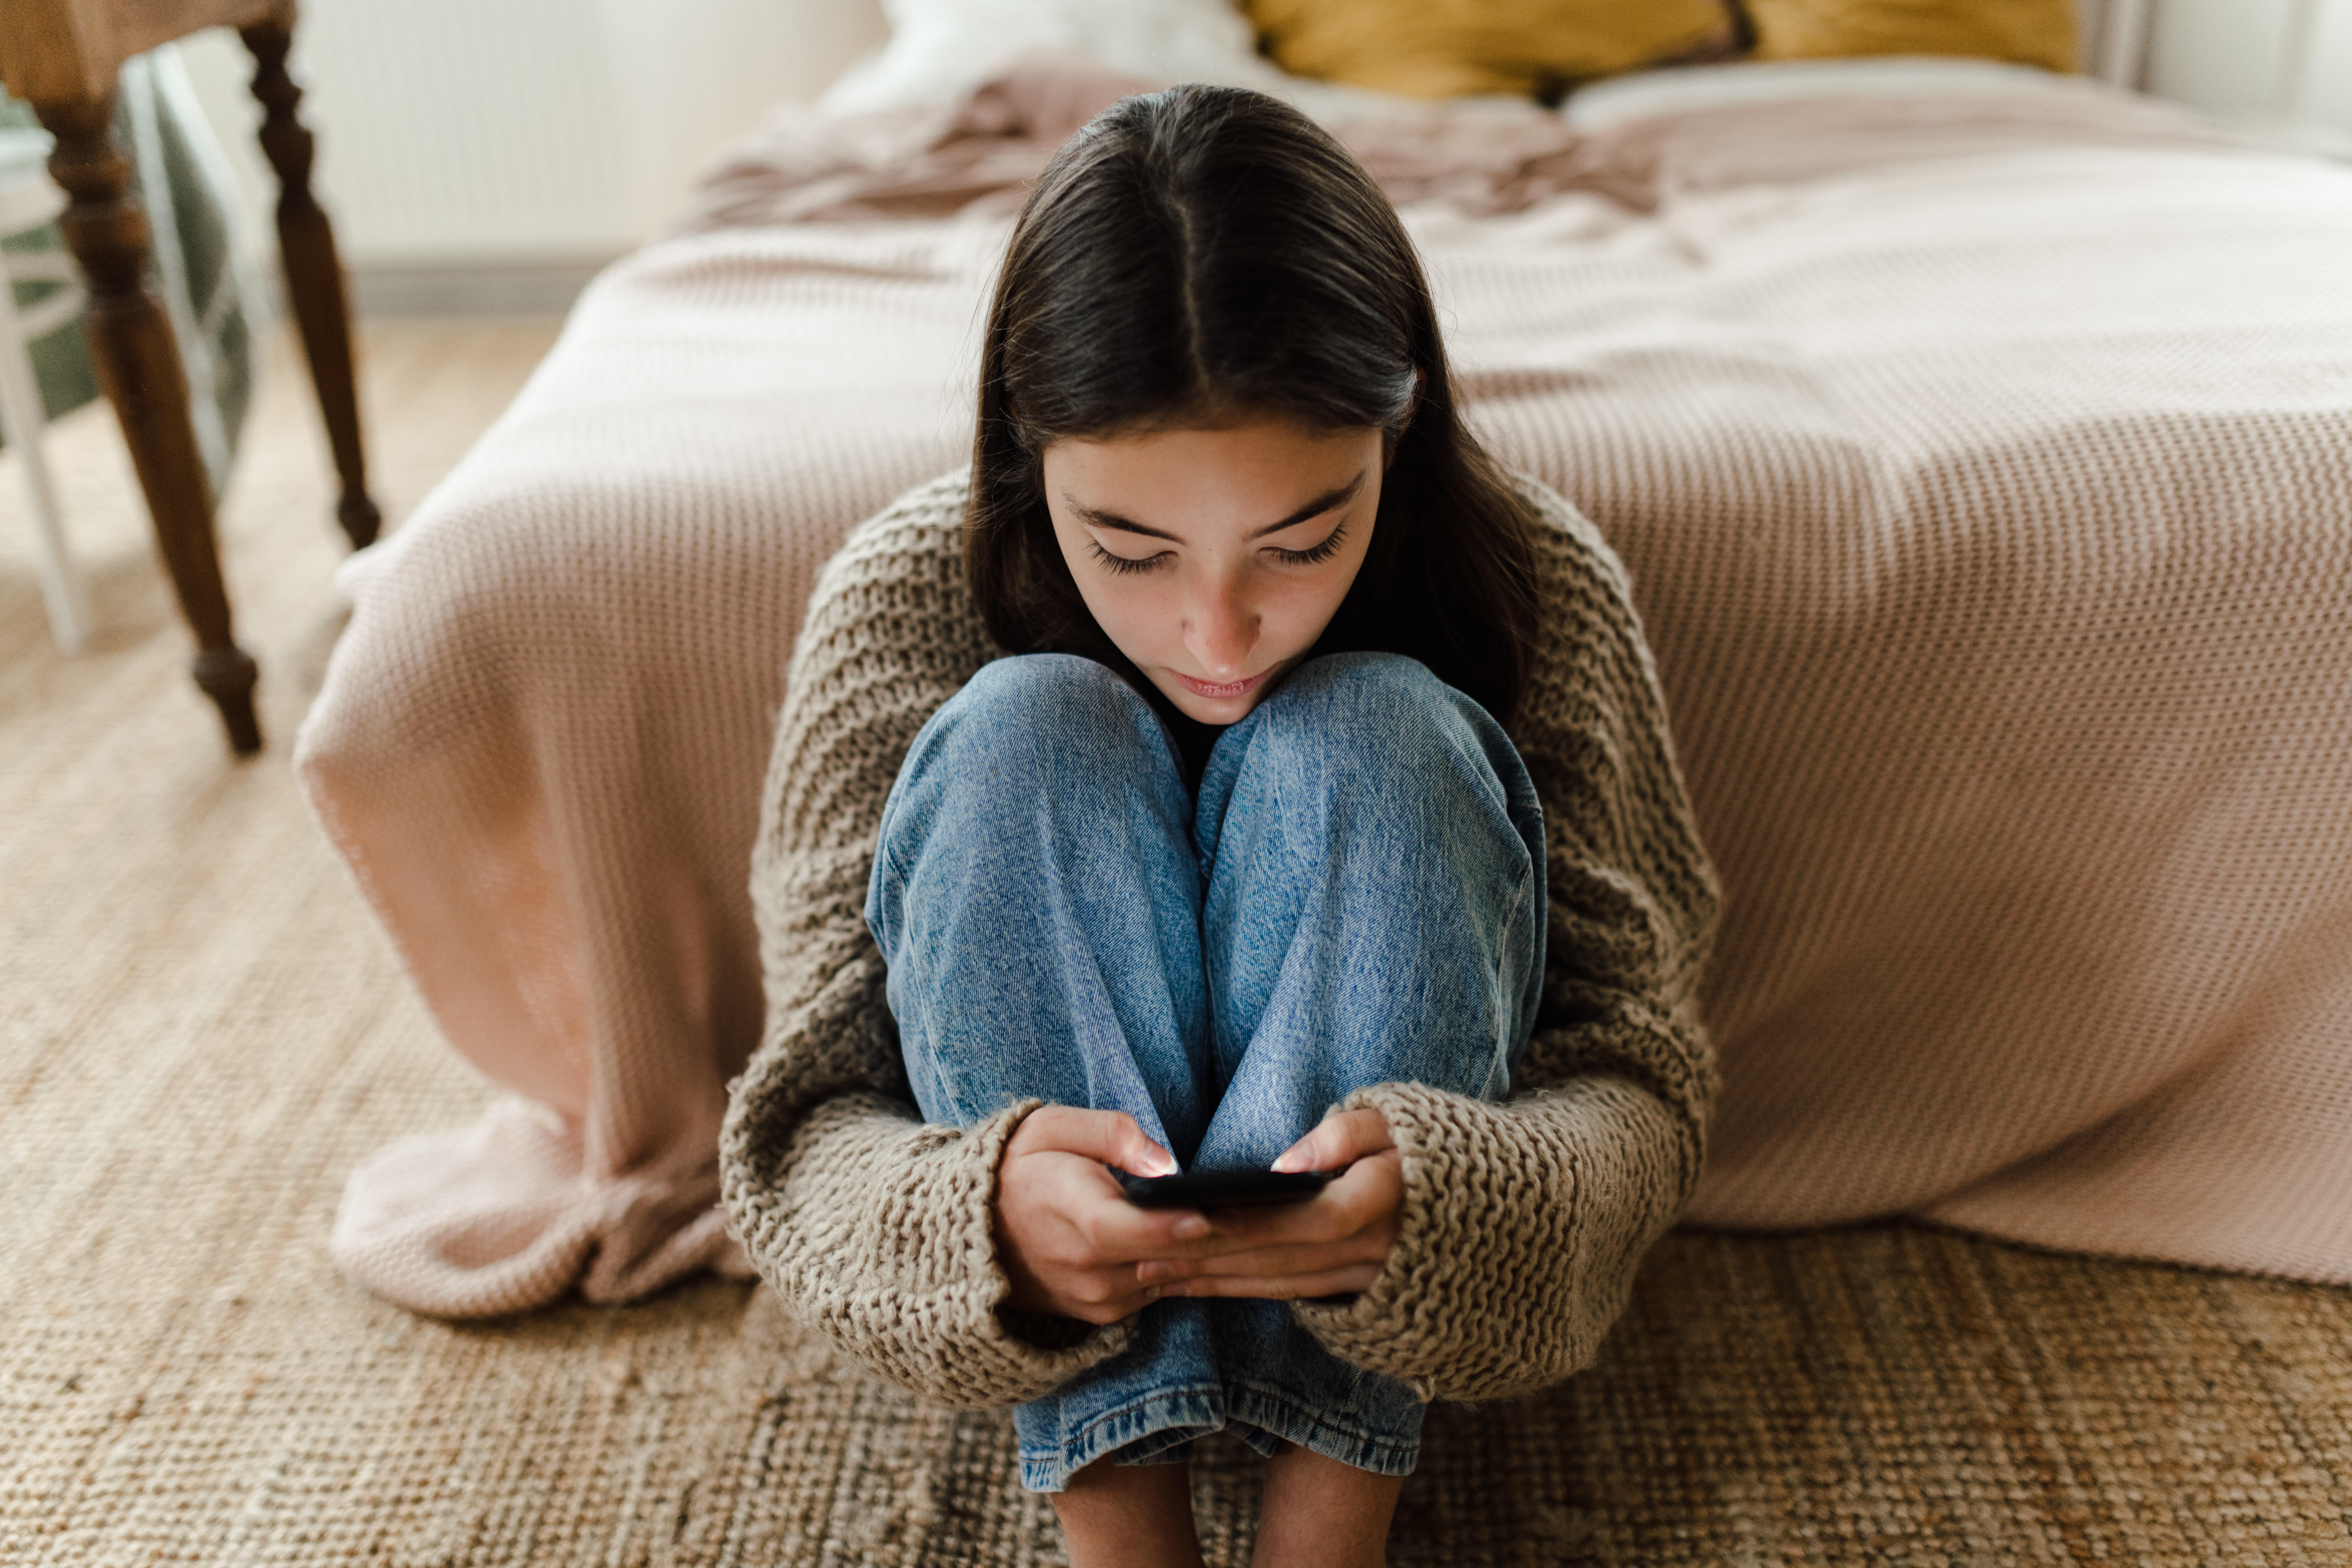 Nearly 70% of Girls Struggle With Loneliness, a New Survey Shows — Here’s What Parents Can Do